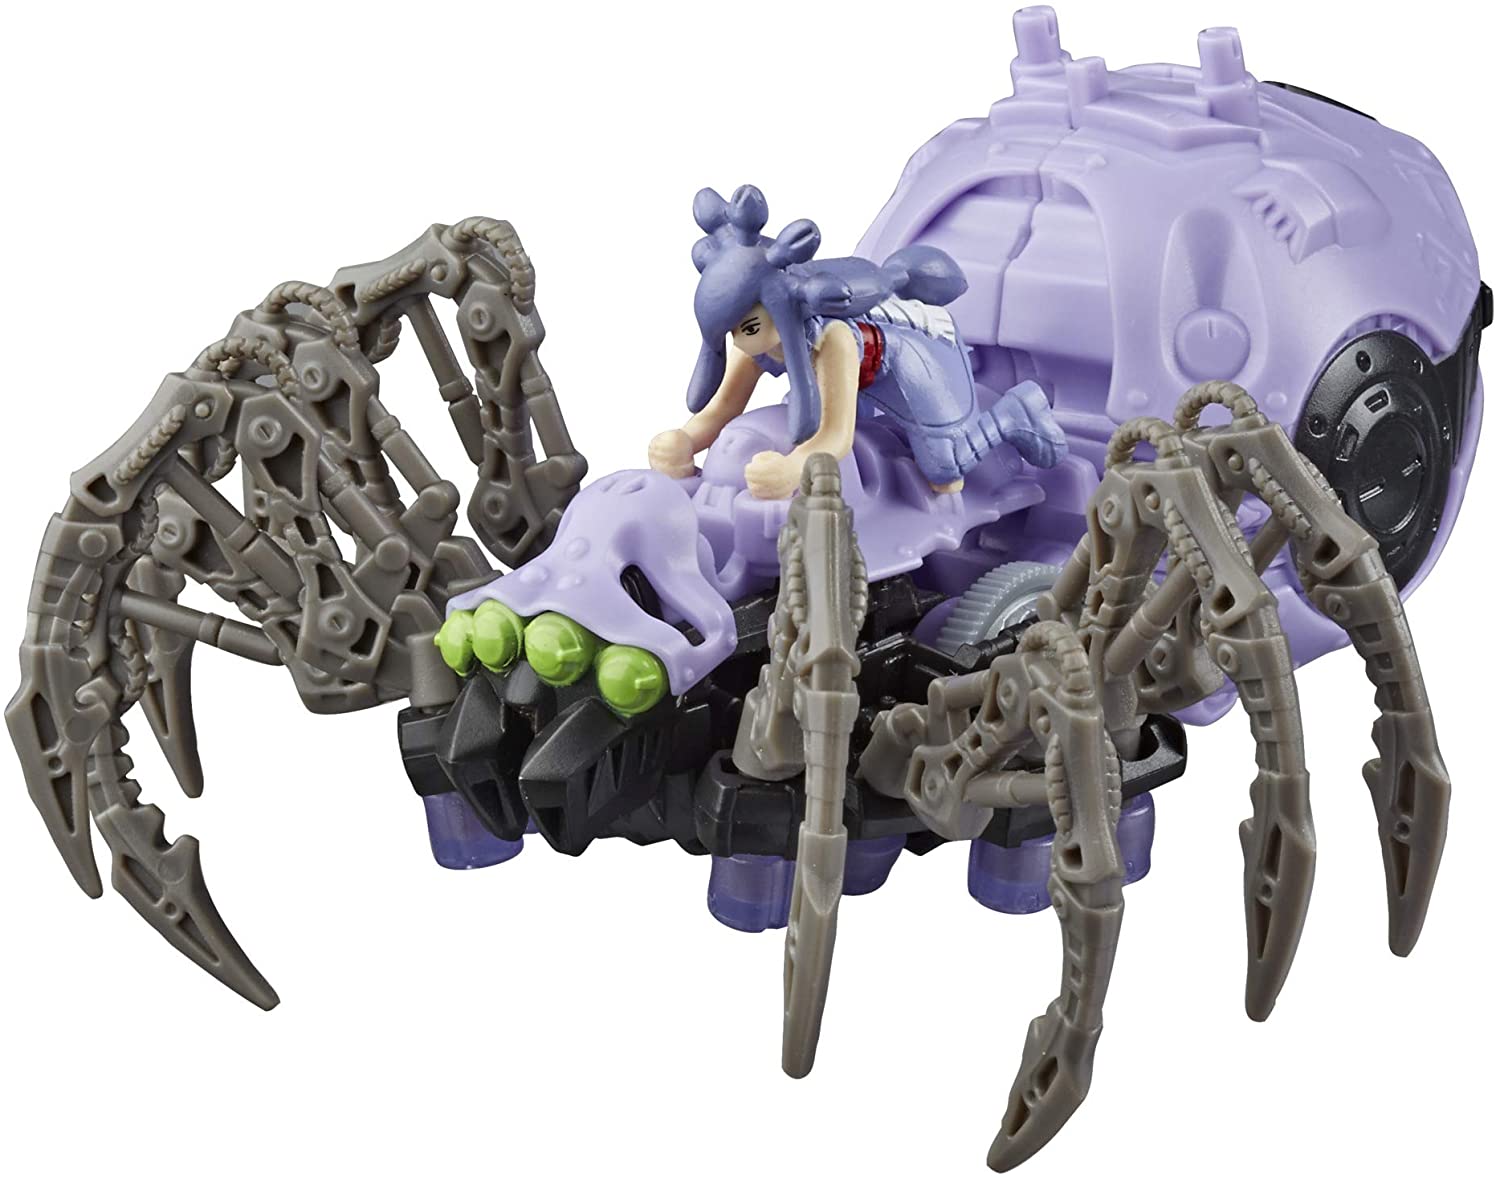 ZOIDS Hasbro Mega Battlers Phobia - Spider-Type Buildable Beast Figure with Wind-Up Motion - Toys for Kids Ages 8 and Up, 35 Pieces